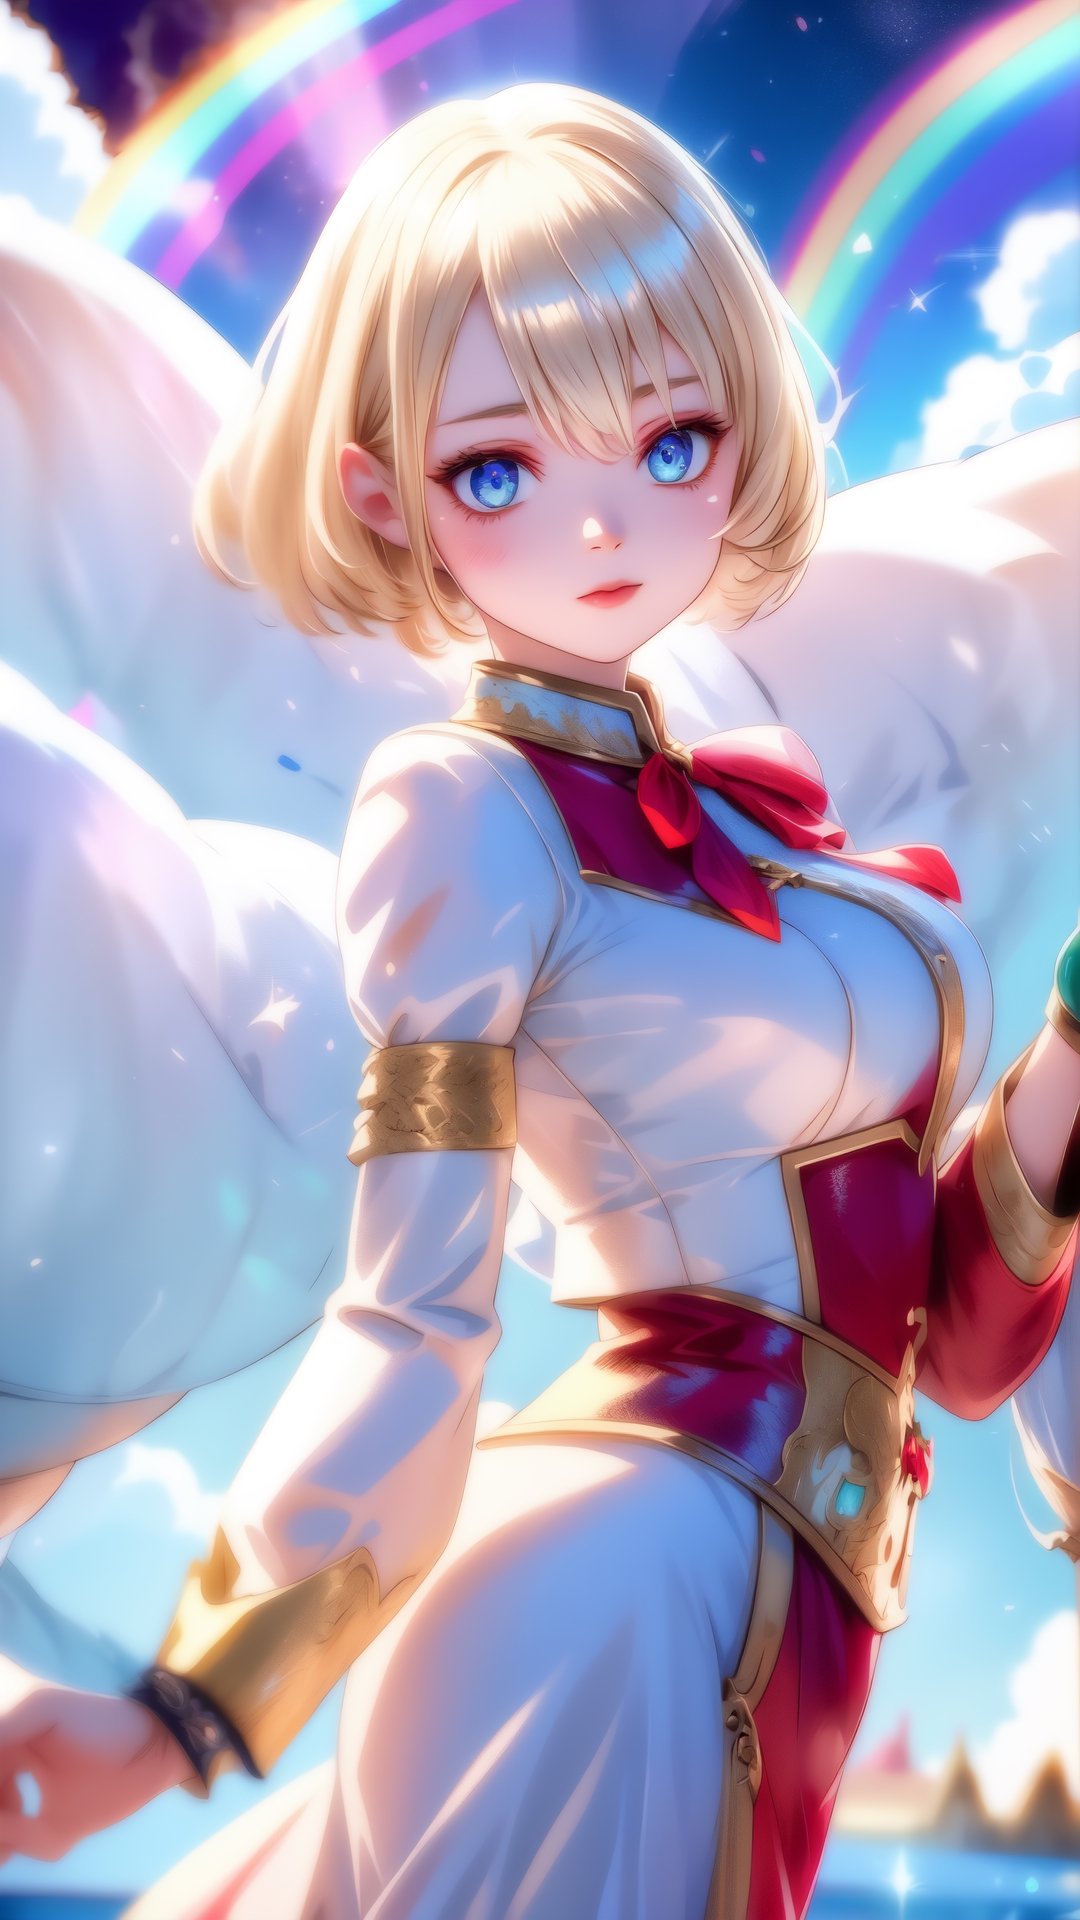 1 girl, blond hairs, short hairs, A breathtaking fusion of realism and surrealism as a vivid, mist-covered Santa girl, composed entirely of vibrant clouds, floats in a rainbow-filled sky, ((perfect hands:0.8))